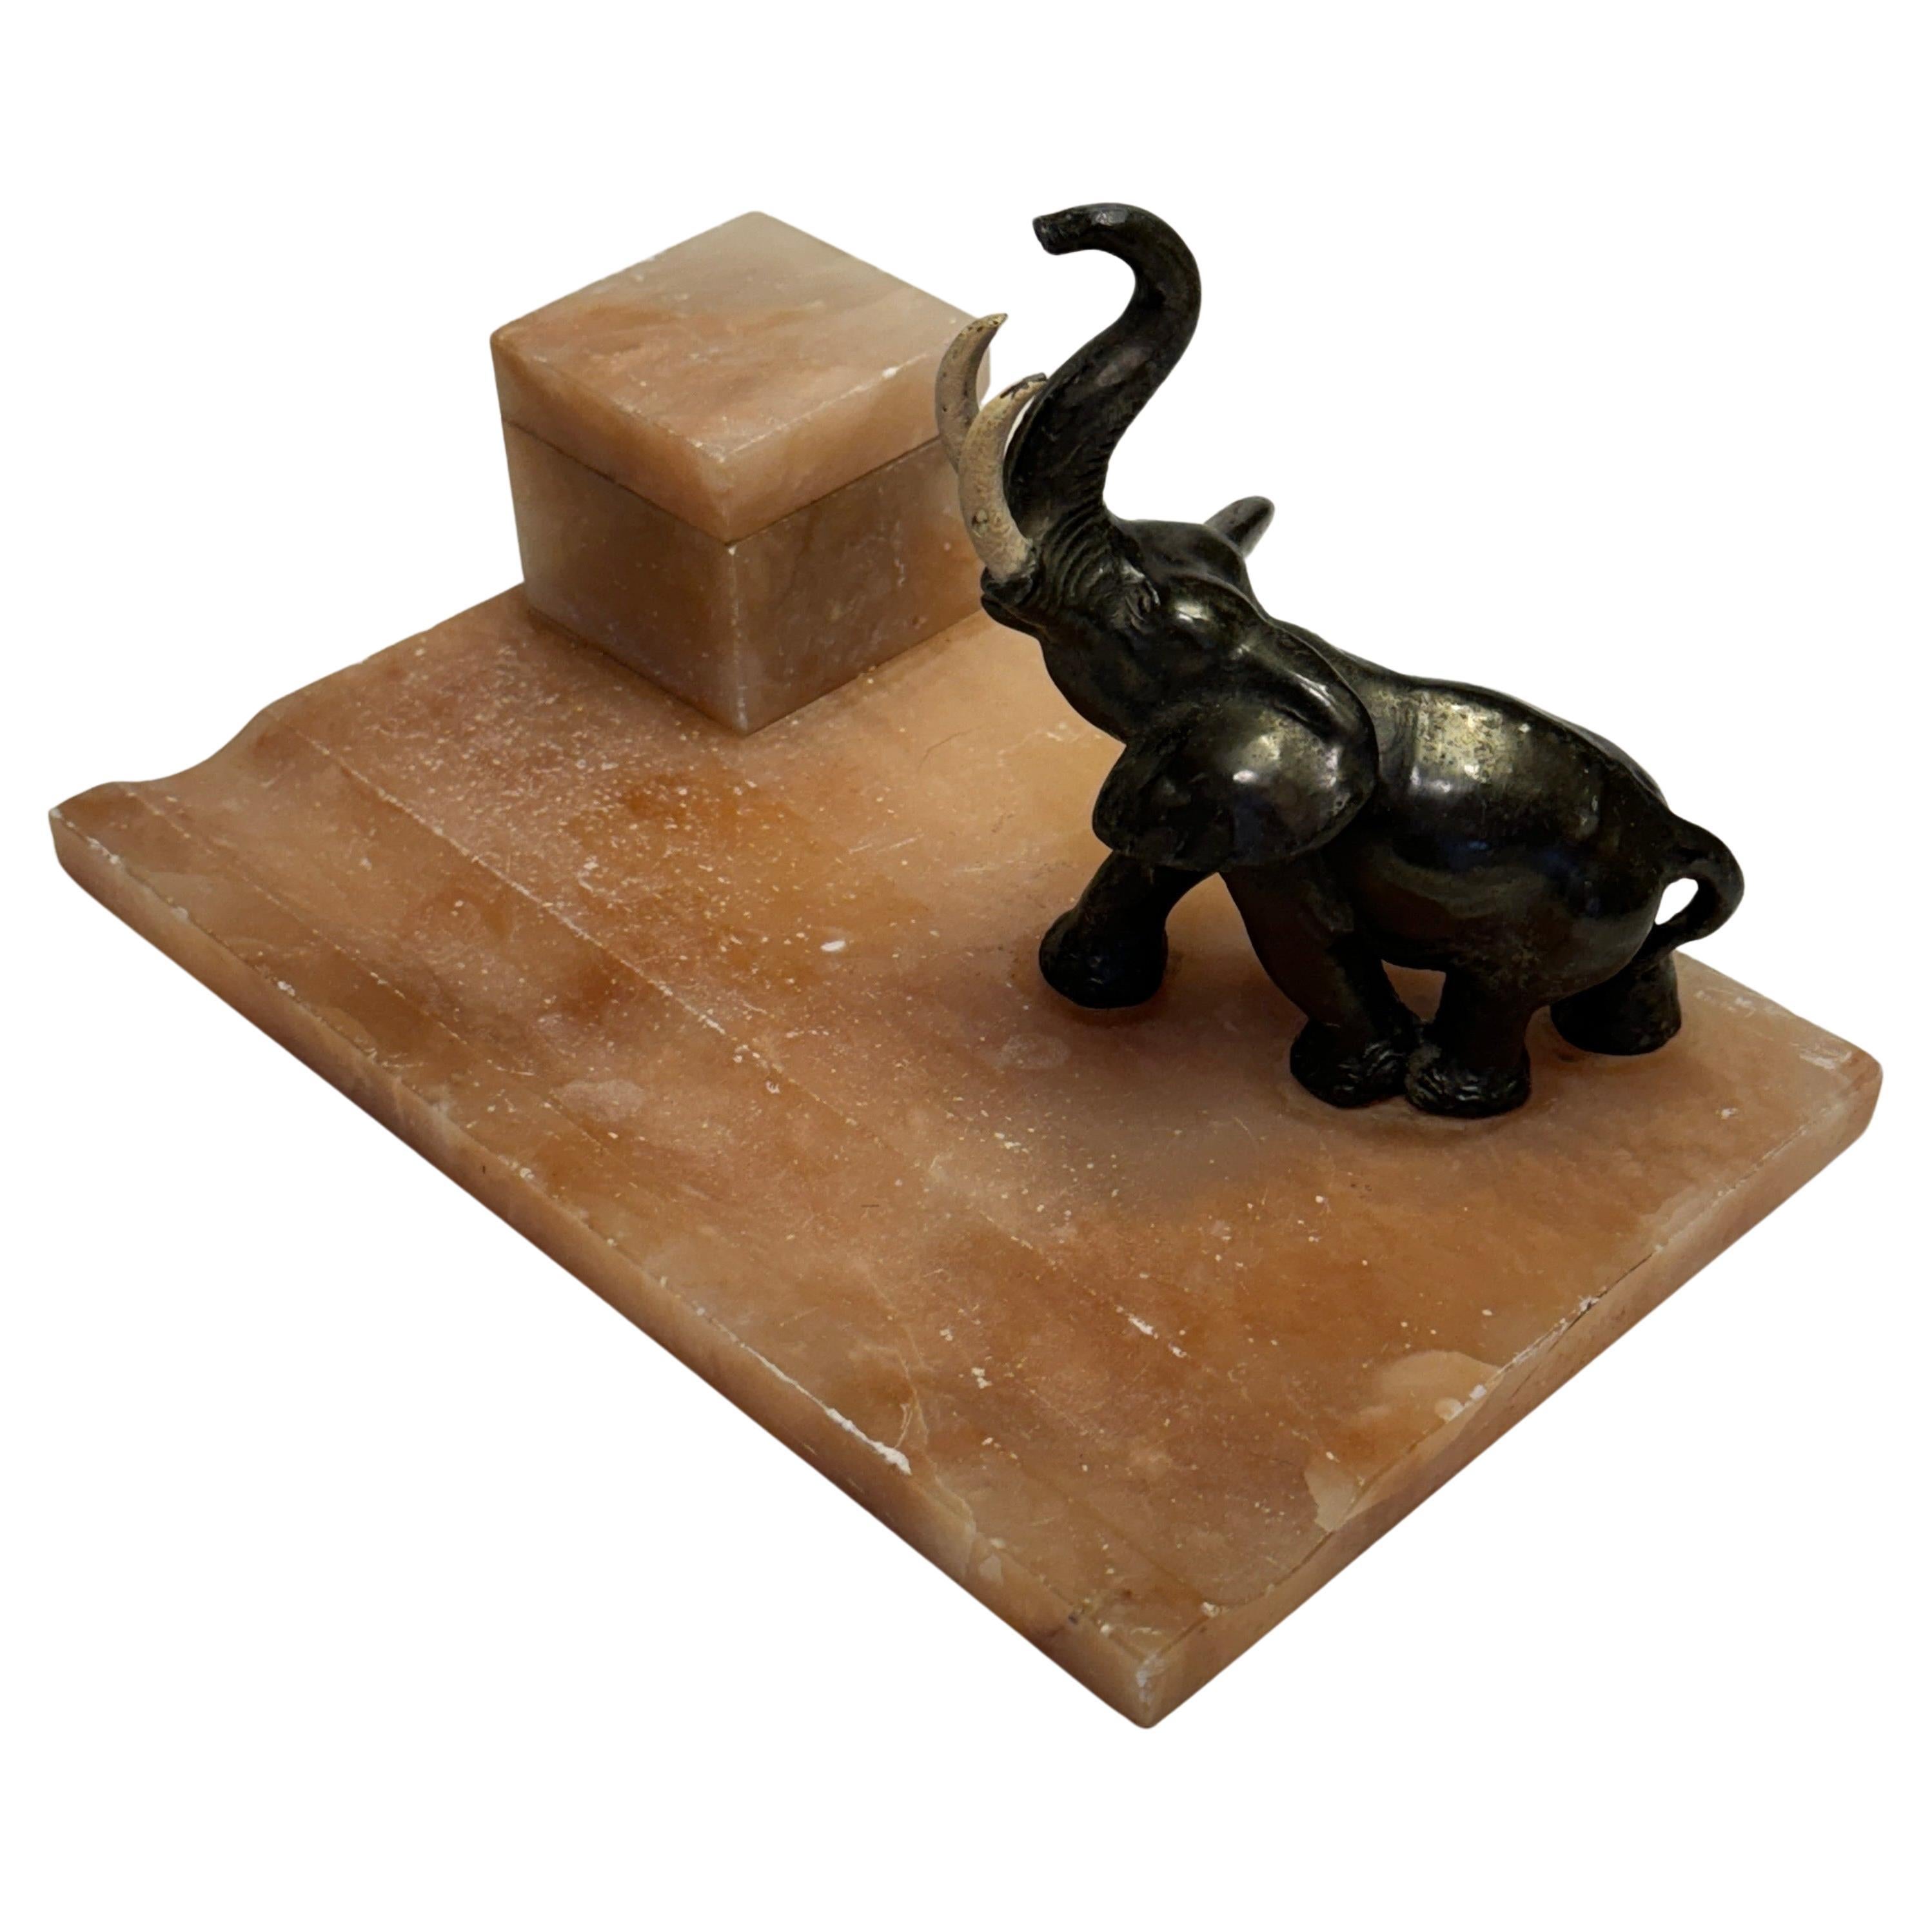 Beautifull Art Deco desk set in Alabaster and Bronze with large decorative Elephant, inkwell and carved area as penholder. This is a wonderful piece for a collector of these pieces.